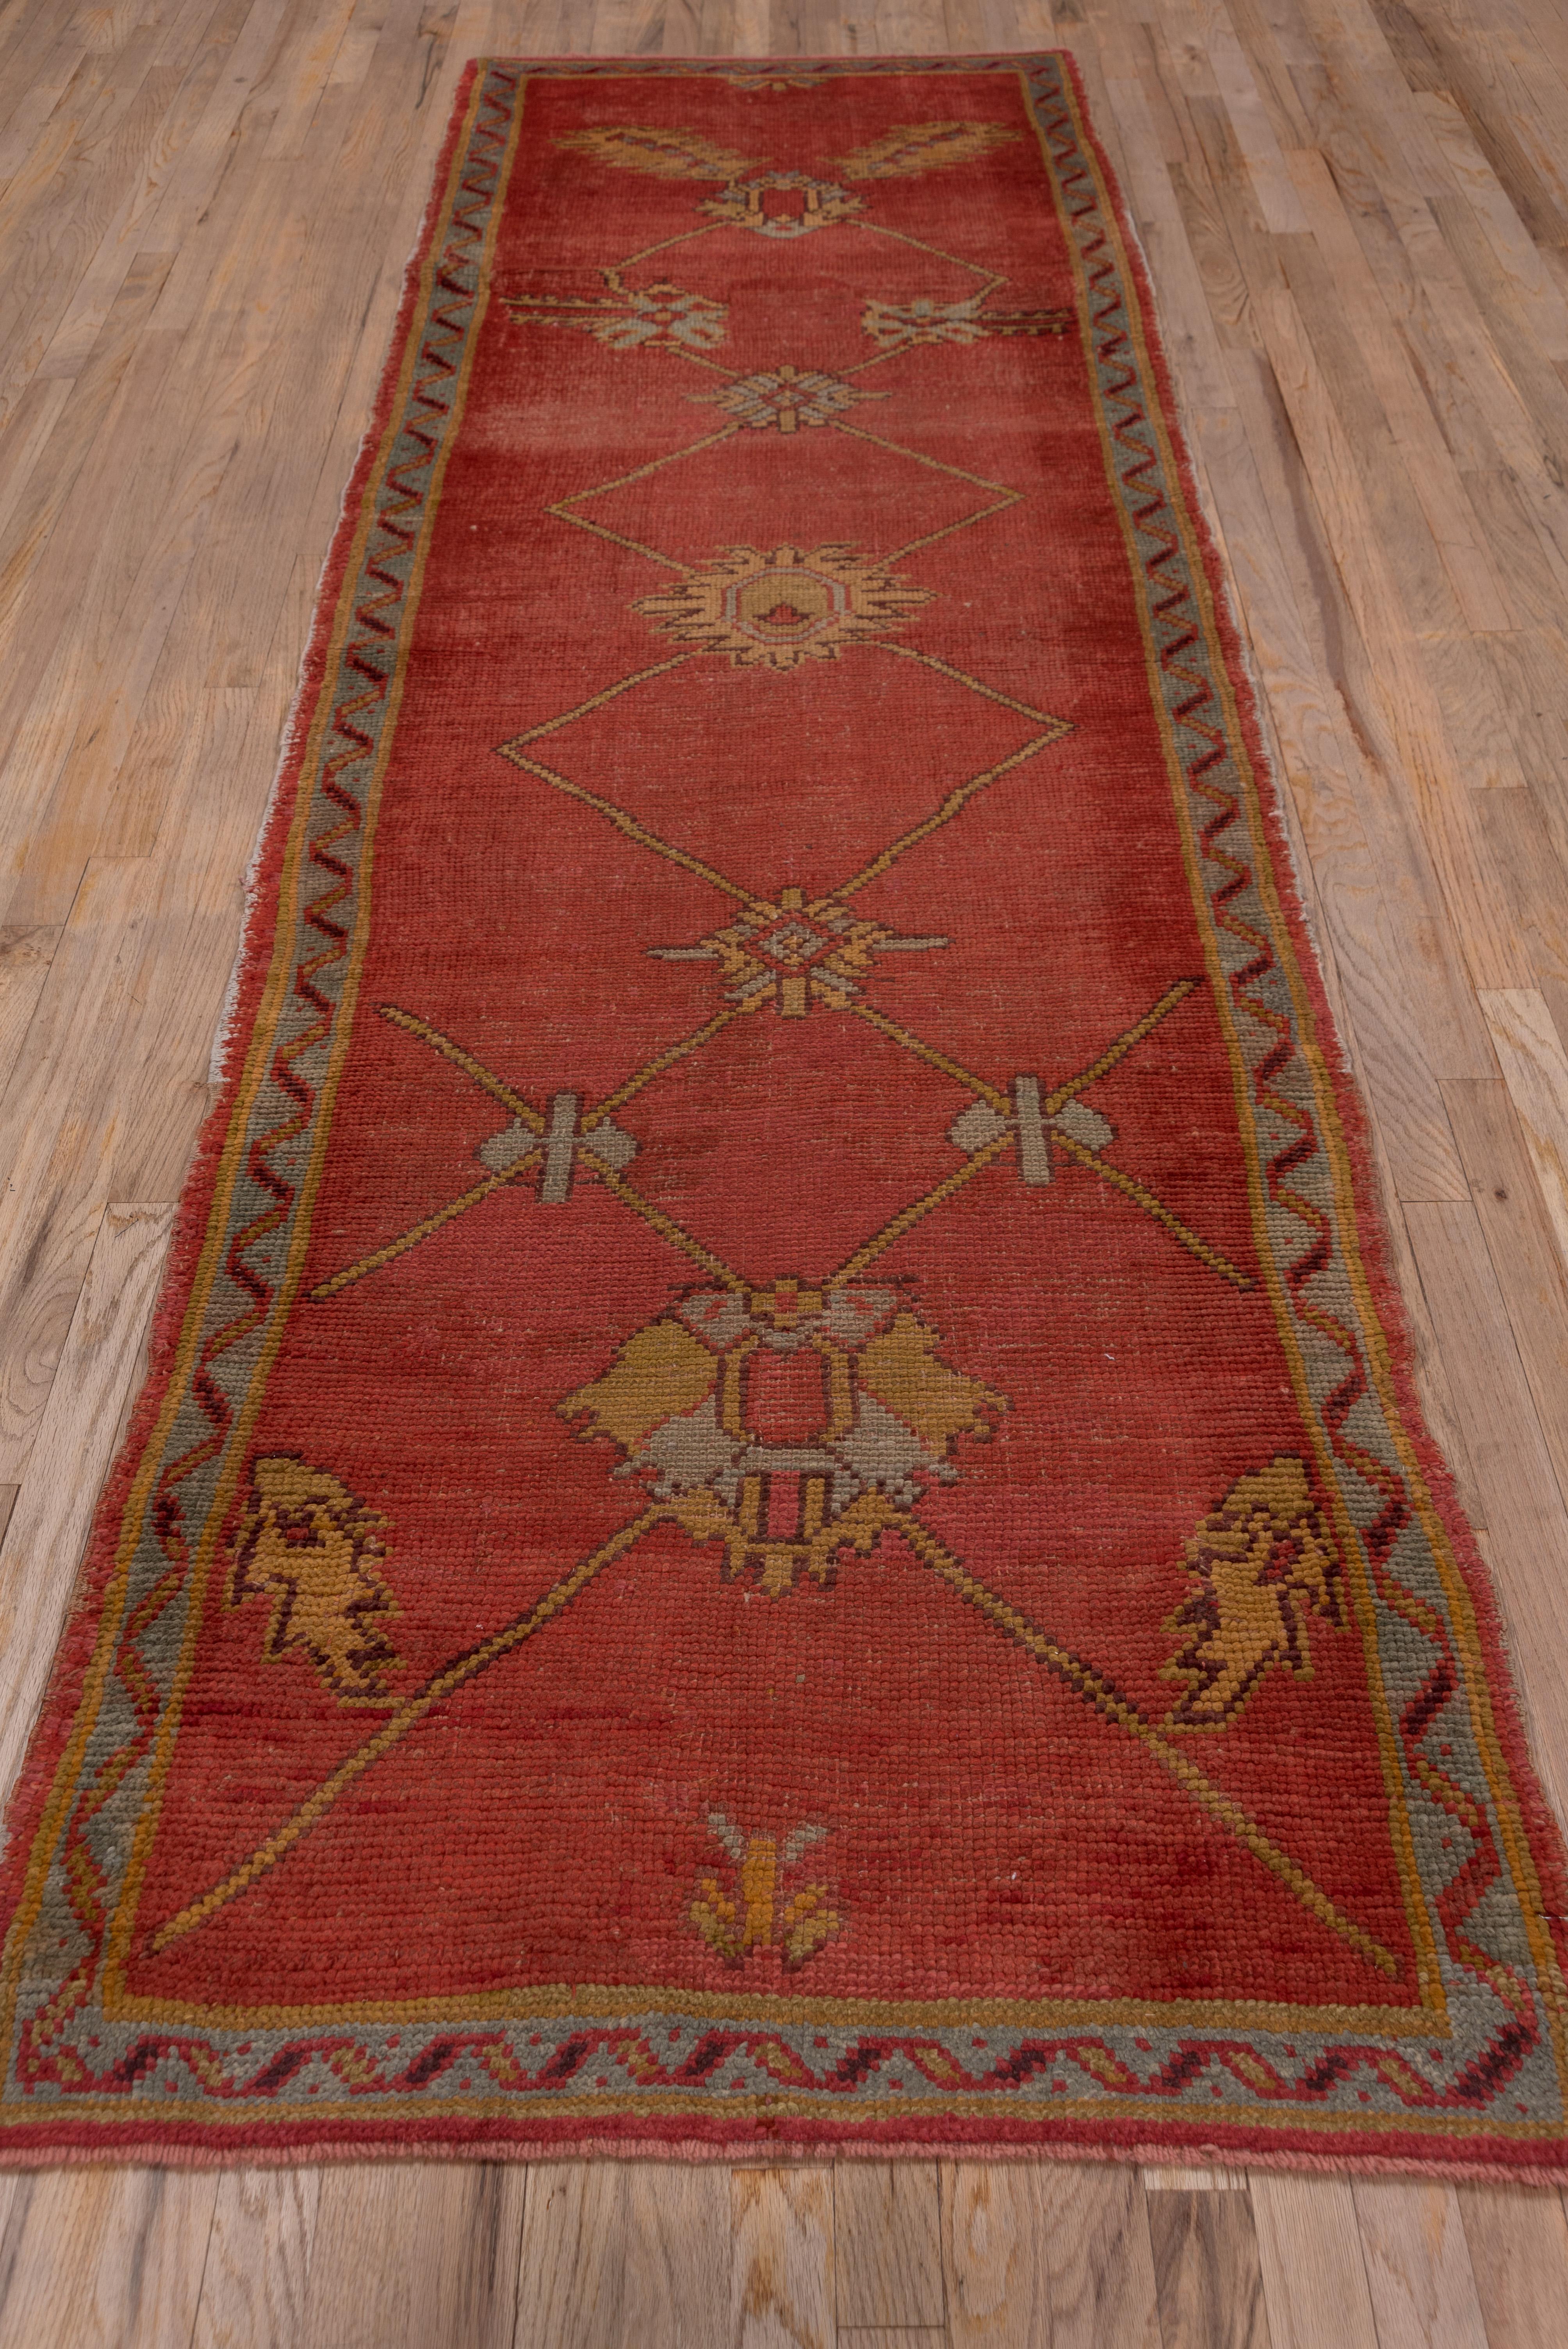 Oushak runners refer to a type of carpet or rug that originates from the Oushak region in Western Anatolia, Turkey. Oushak rugs are renowned for their exceptional quality, craftsmanship, and distinct design characteristics. They are highly sought